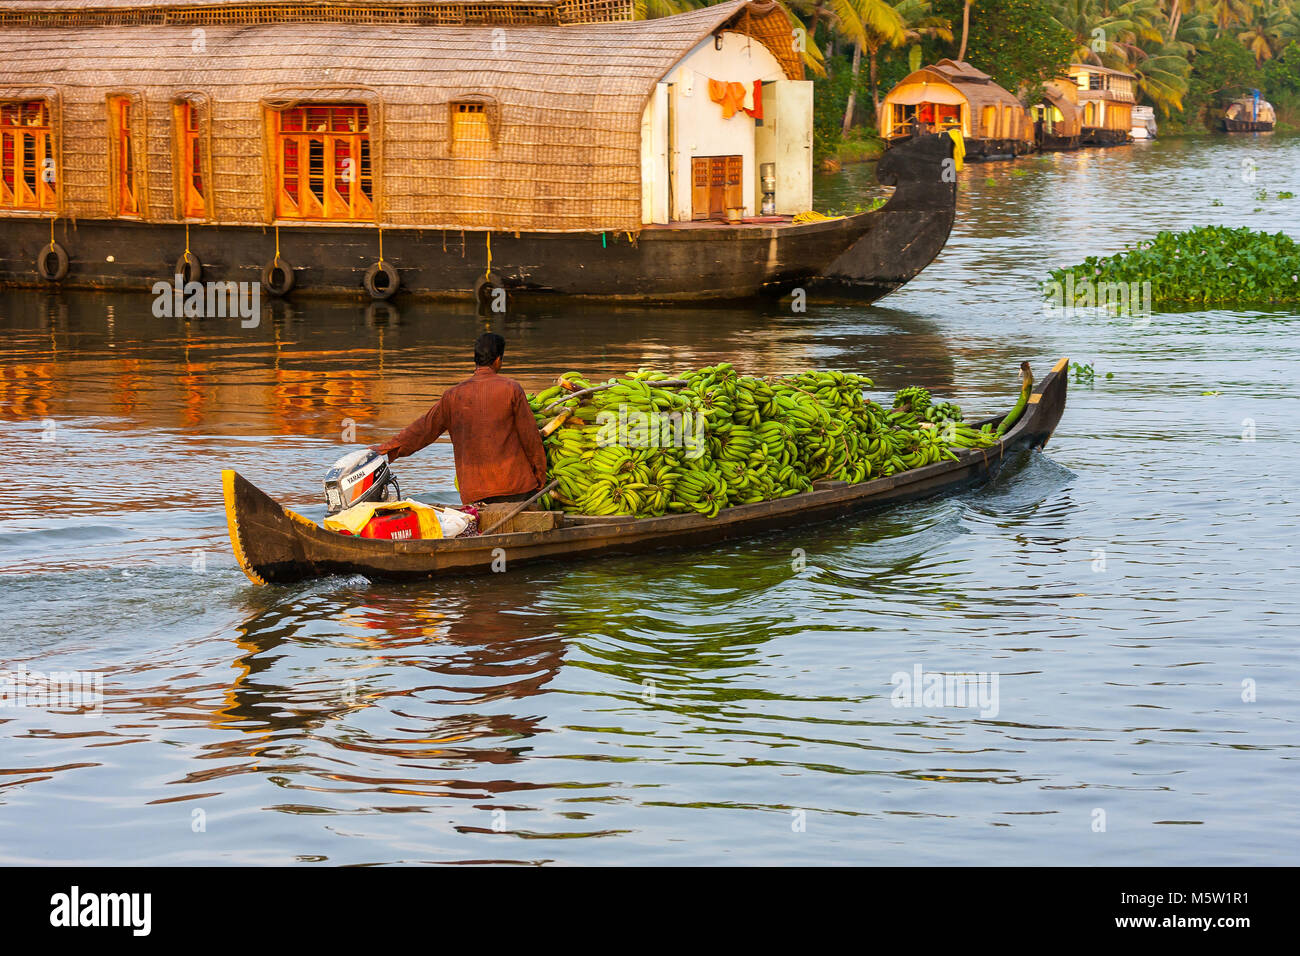 Transporting a load of  fresh bananas on a canoe on the backwater canal system near Alleppey in Kerala, India. Stock Photo